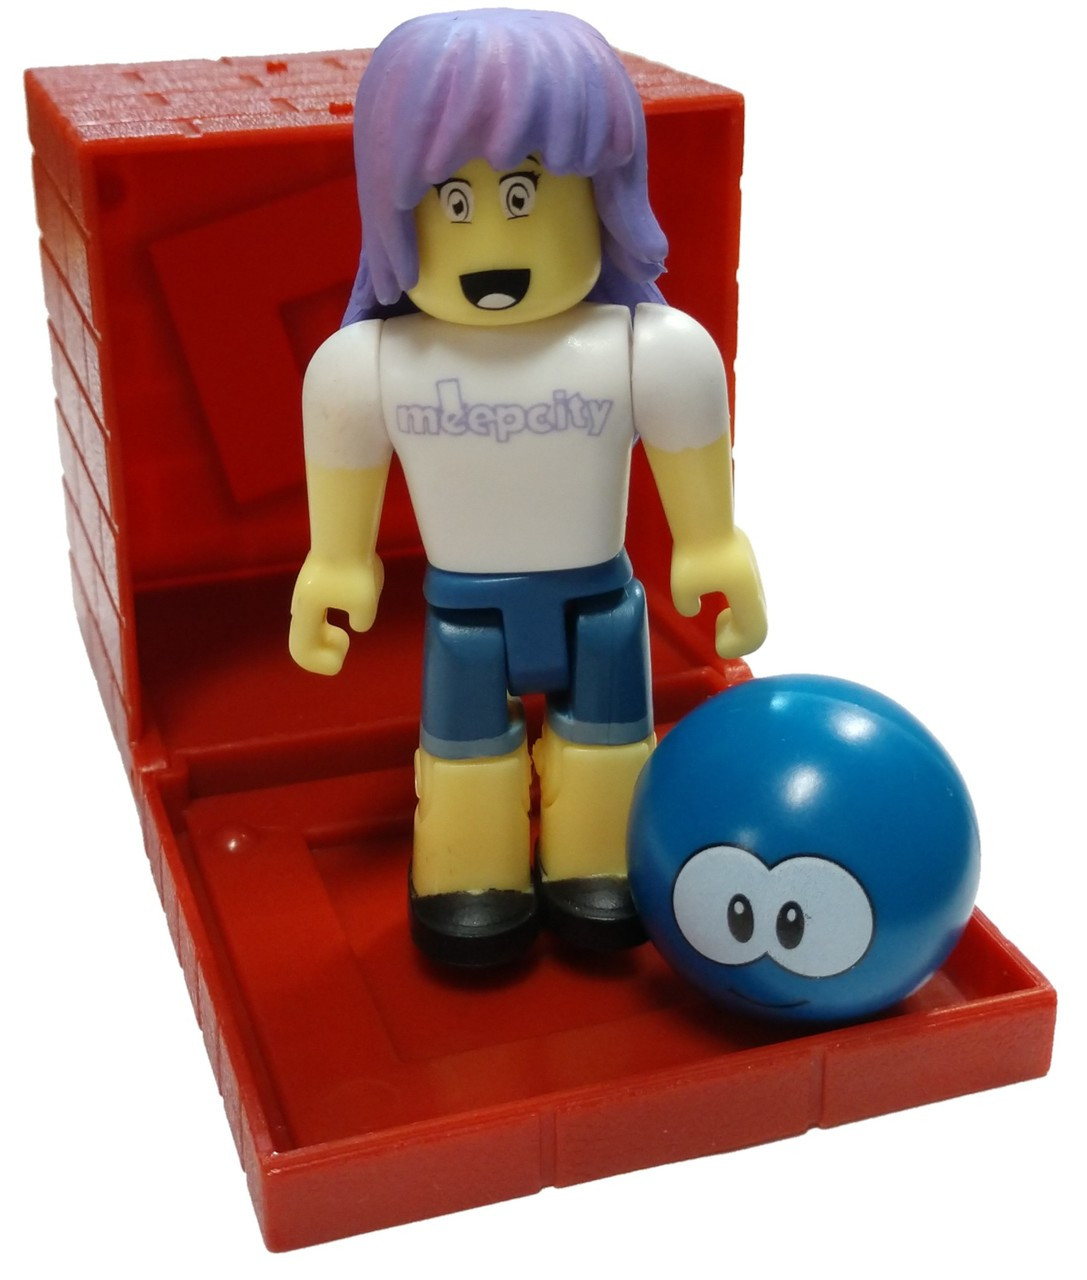 Roblox Red Series 4 Meepcity Pet Seller 3 Mini Figure With Red Cube And Online Code Loose Jazwares Toywiz - update pets evil meepcity horror version roblox